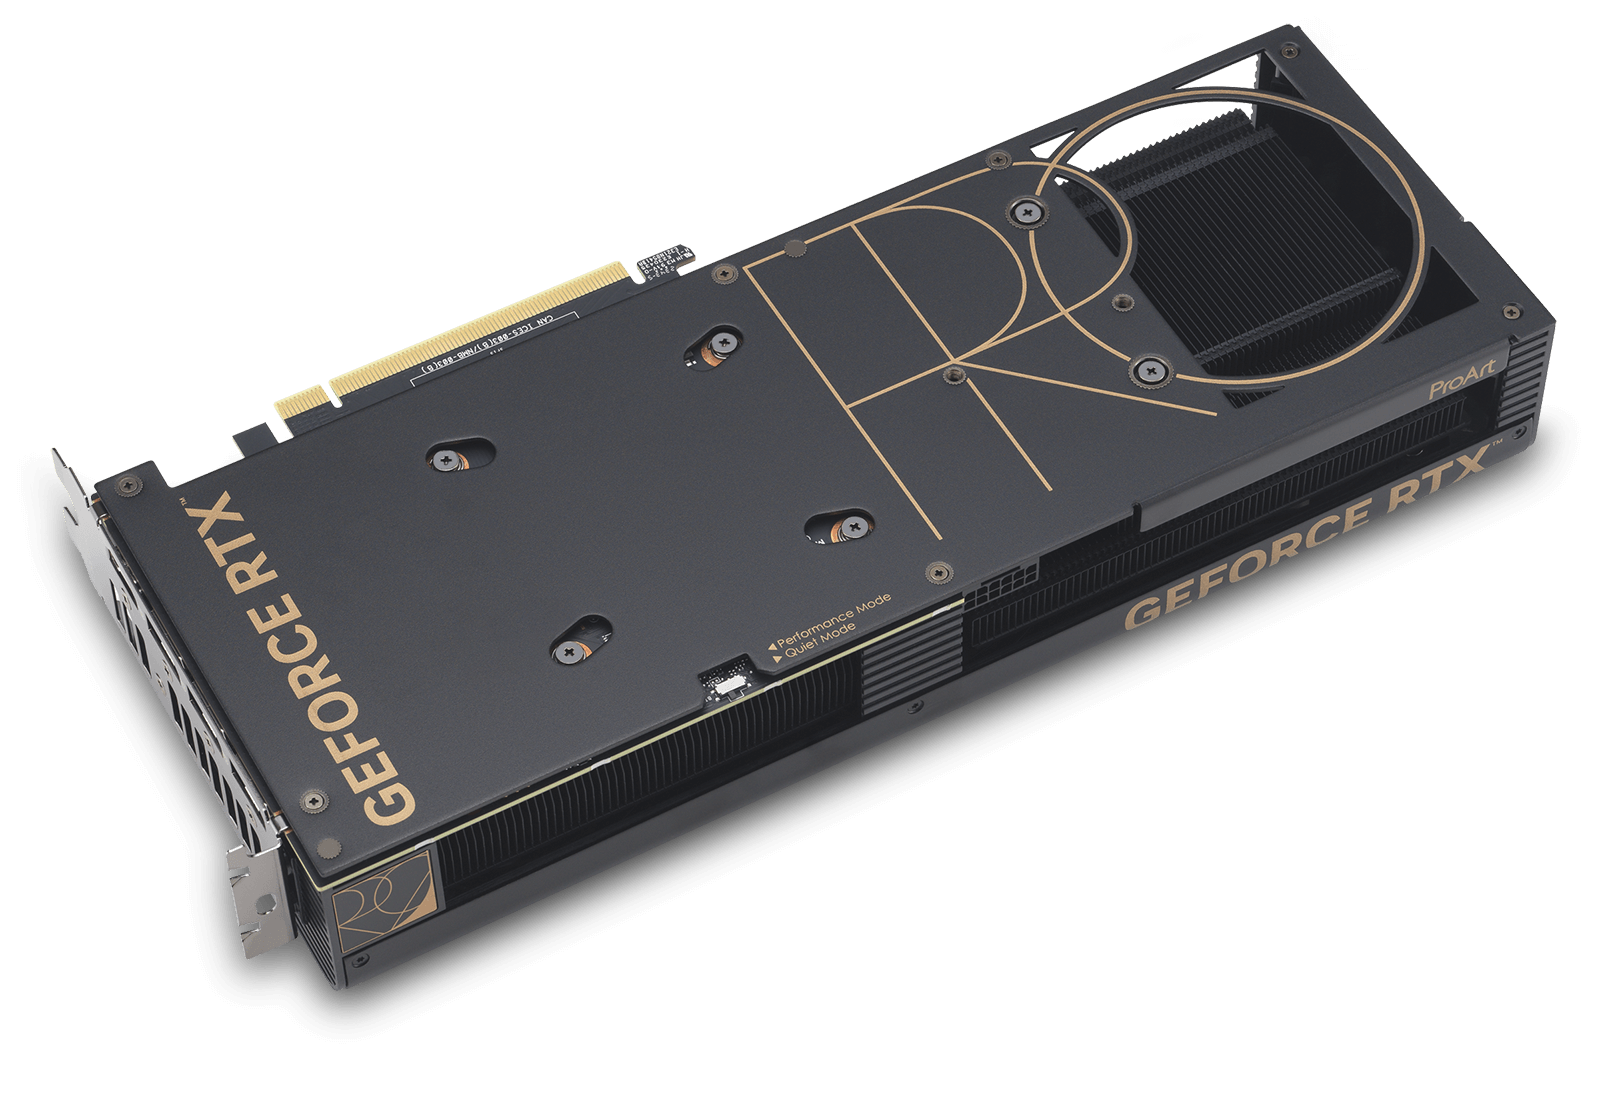 Back view of ProArt GeForce RTX 4070 SUPER graphics card